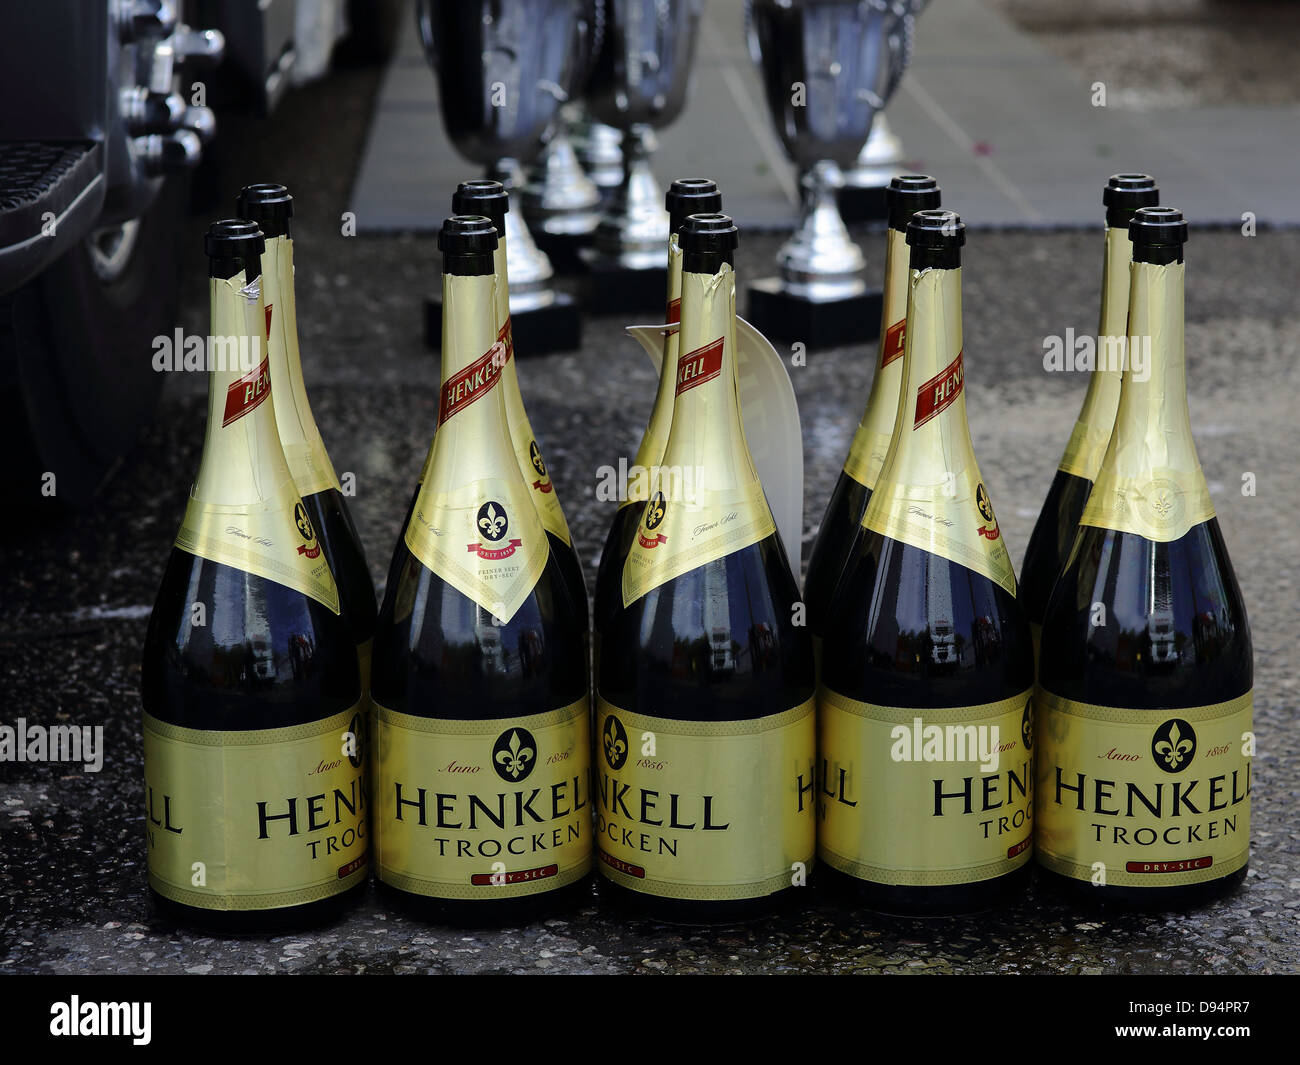 Most famous German sparkling wine, Henkell Trocken. Celebrate your success with this dry, sparkling wine from the Henkell cellar Stock Photo